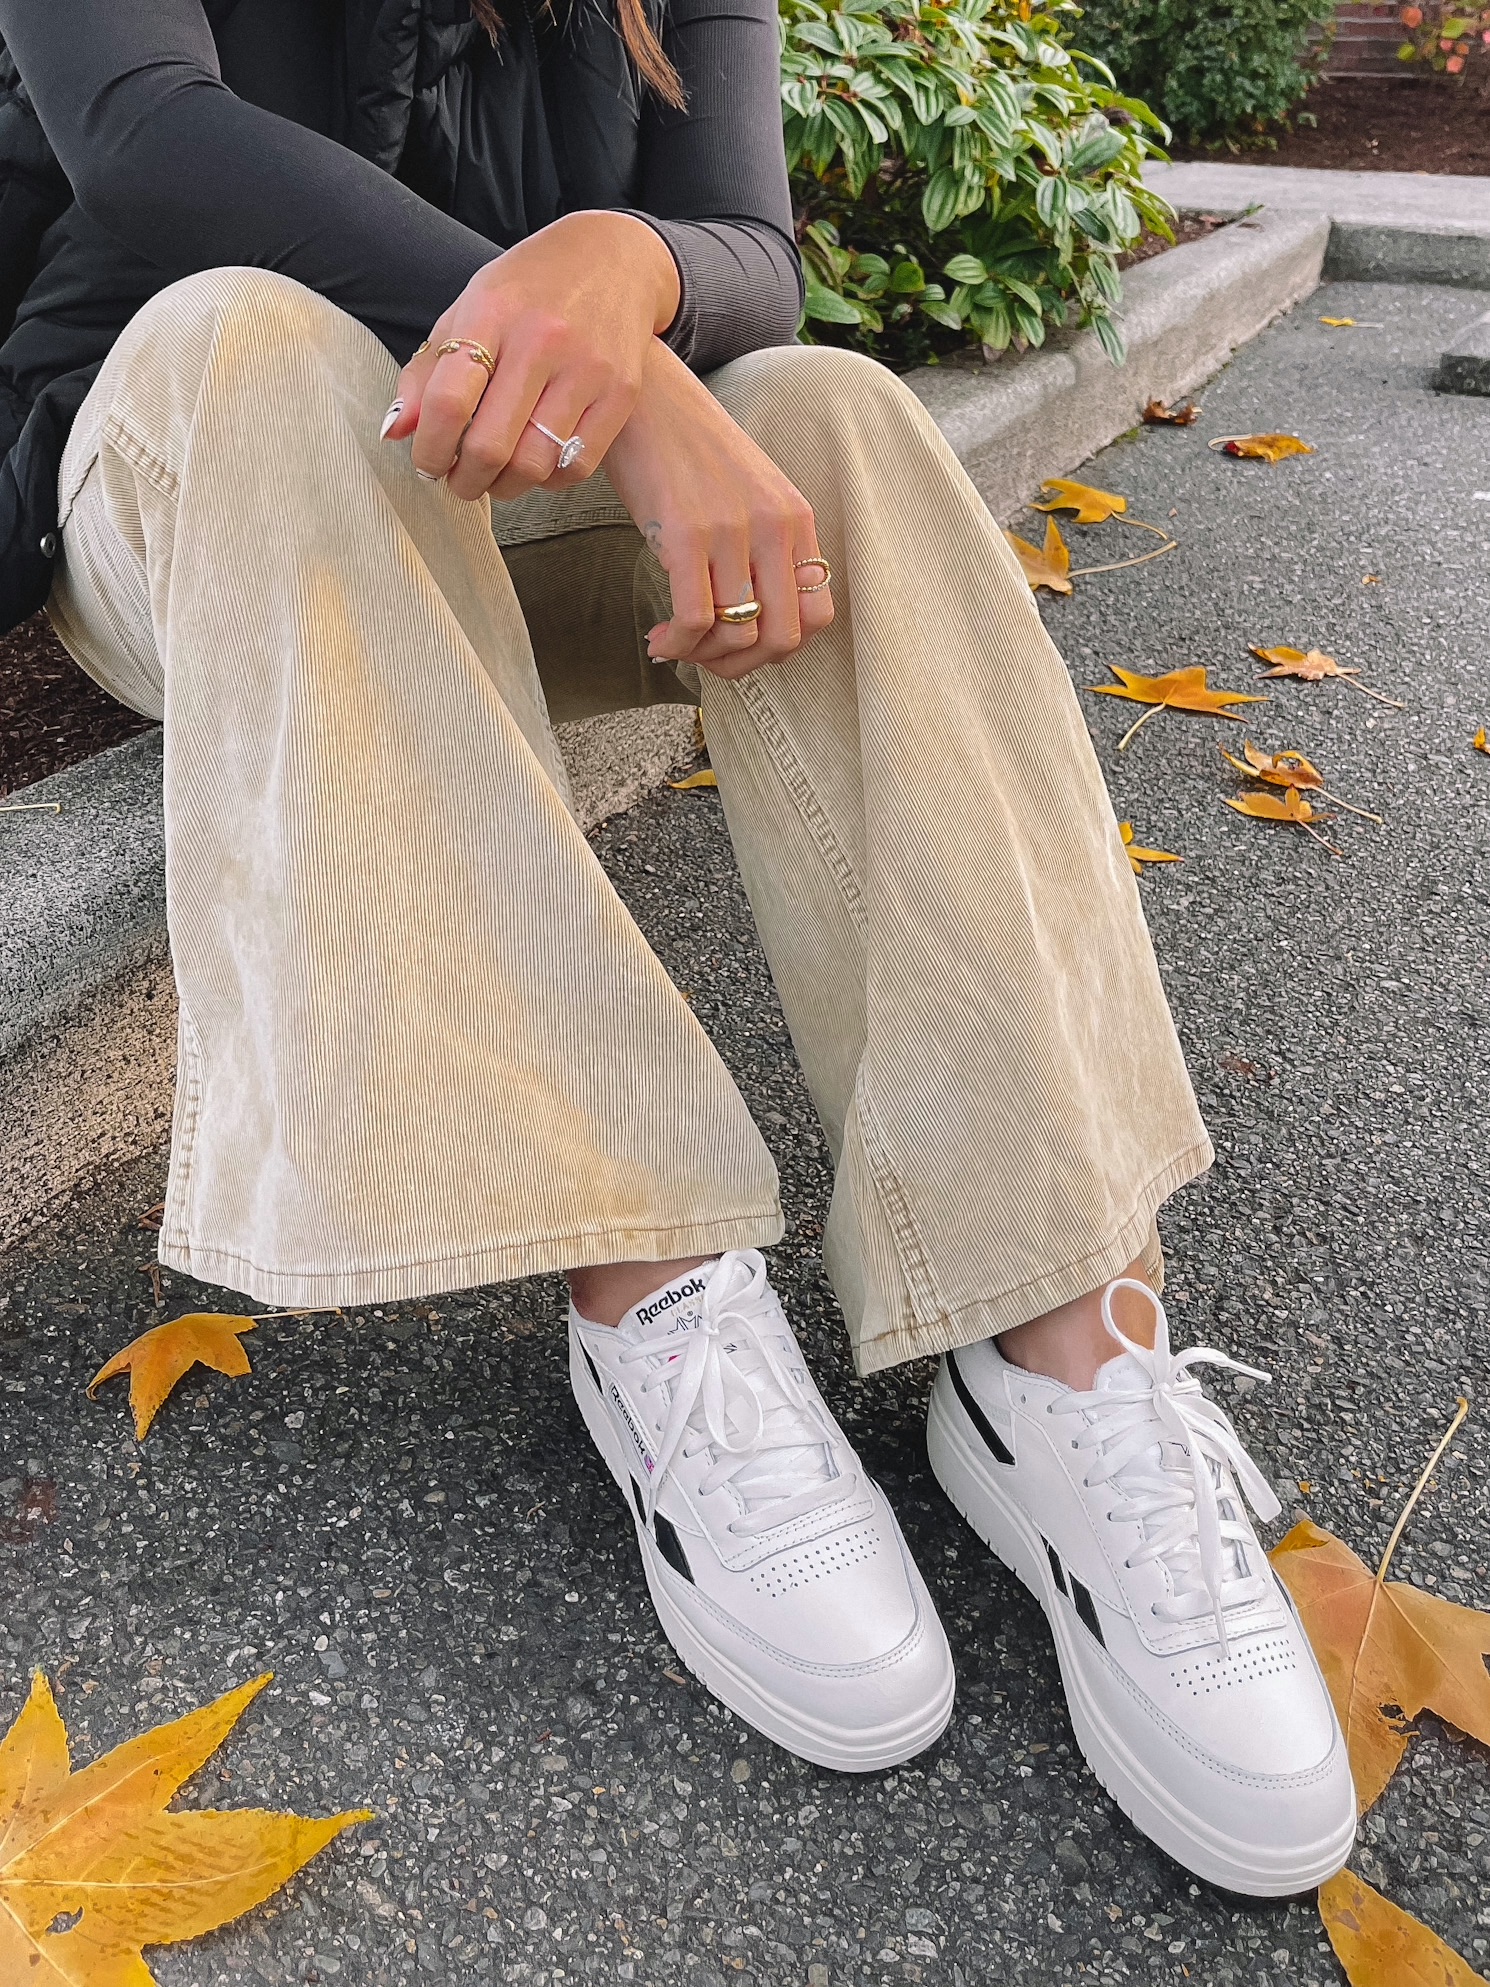 Reebok Club C Sneakers Outfit Ideas